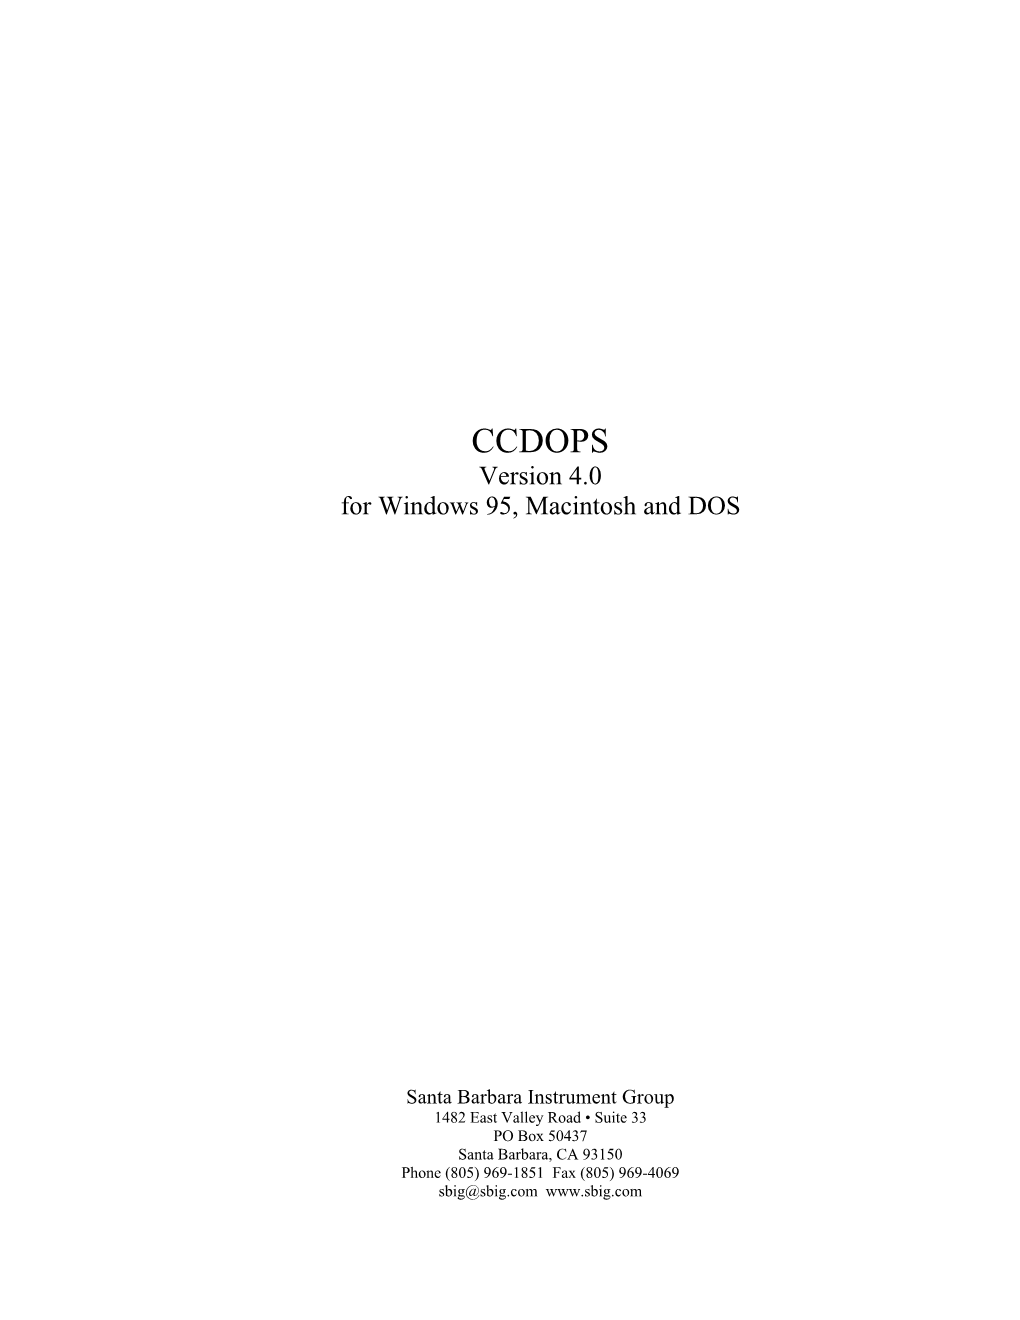 CCDOPS Version 4.0 for Windows 95, Macintosh and DOS